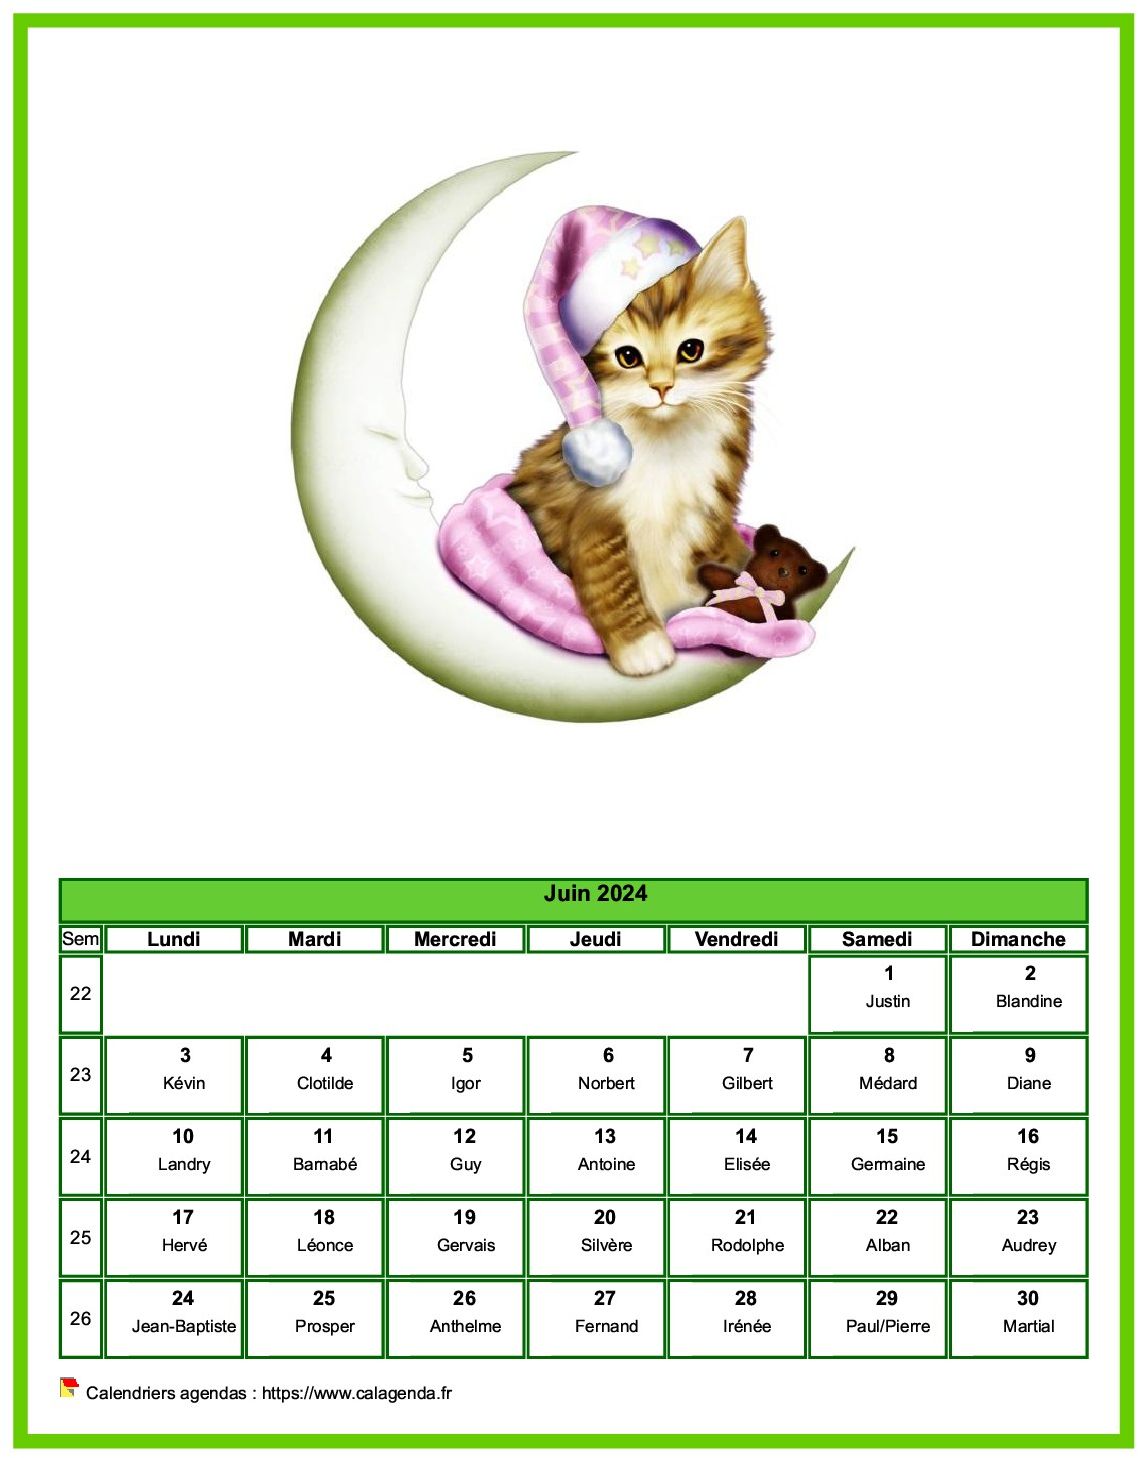 Calendrier juin 2024 chats